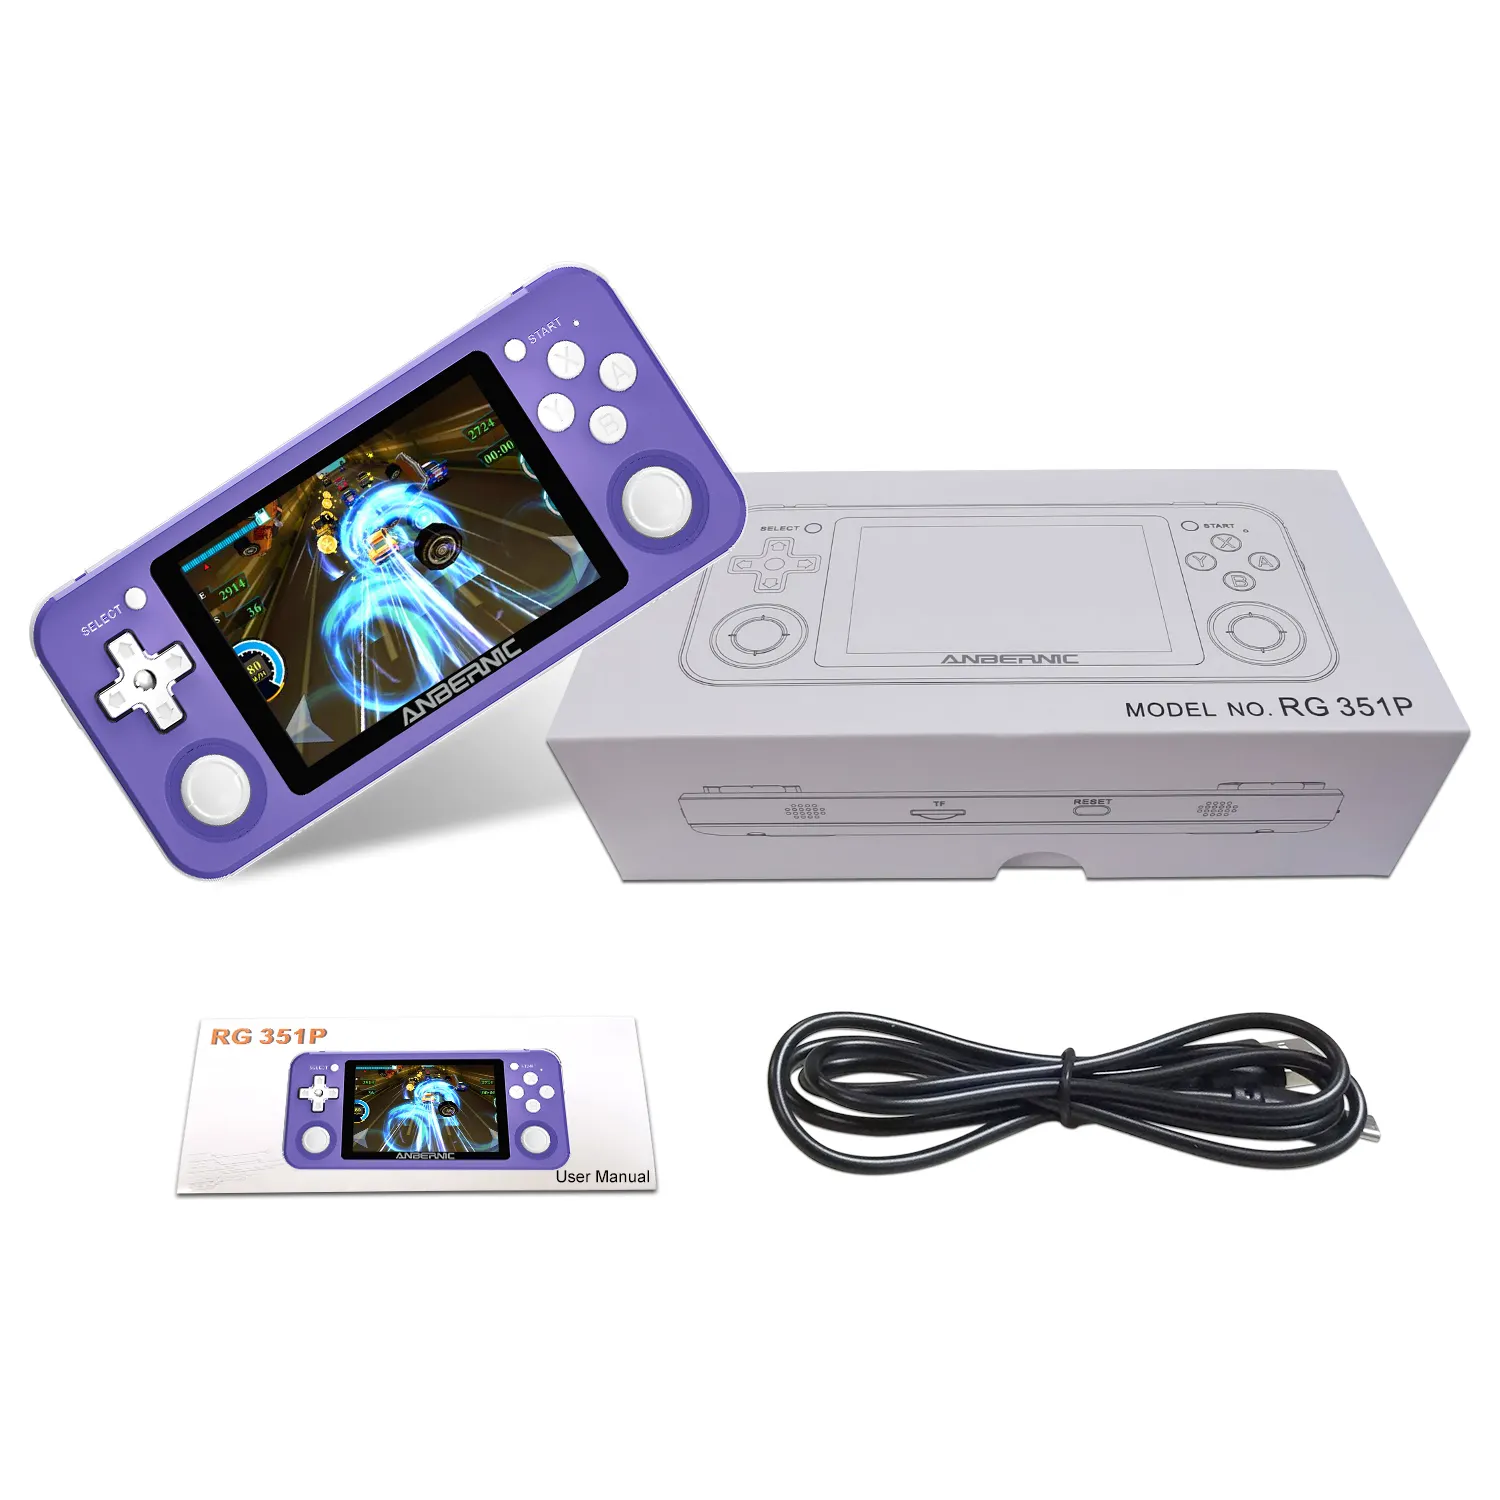 RG351P ANBERNIC Retro Game RK3326 64G Open Source System 3.5 inch IPS Screen Portable Handheld Game Console RG351gift